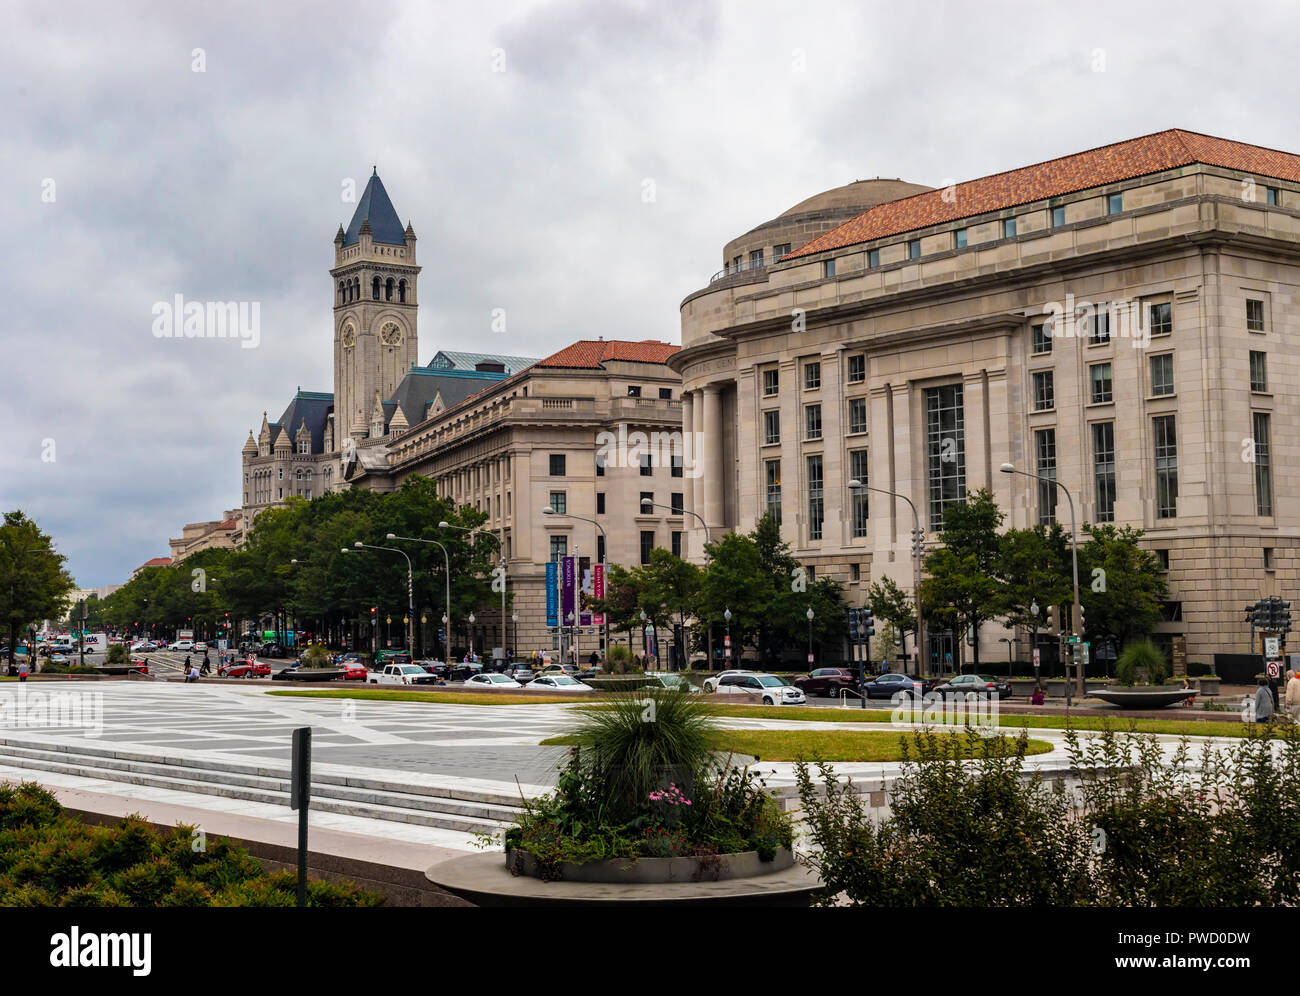 Washington DC, USA - October 12, 2017: Street view of the Old Post Office Pavilion building and clocktower and International Trade Centre building in  Stock Photo